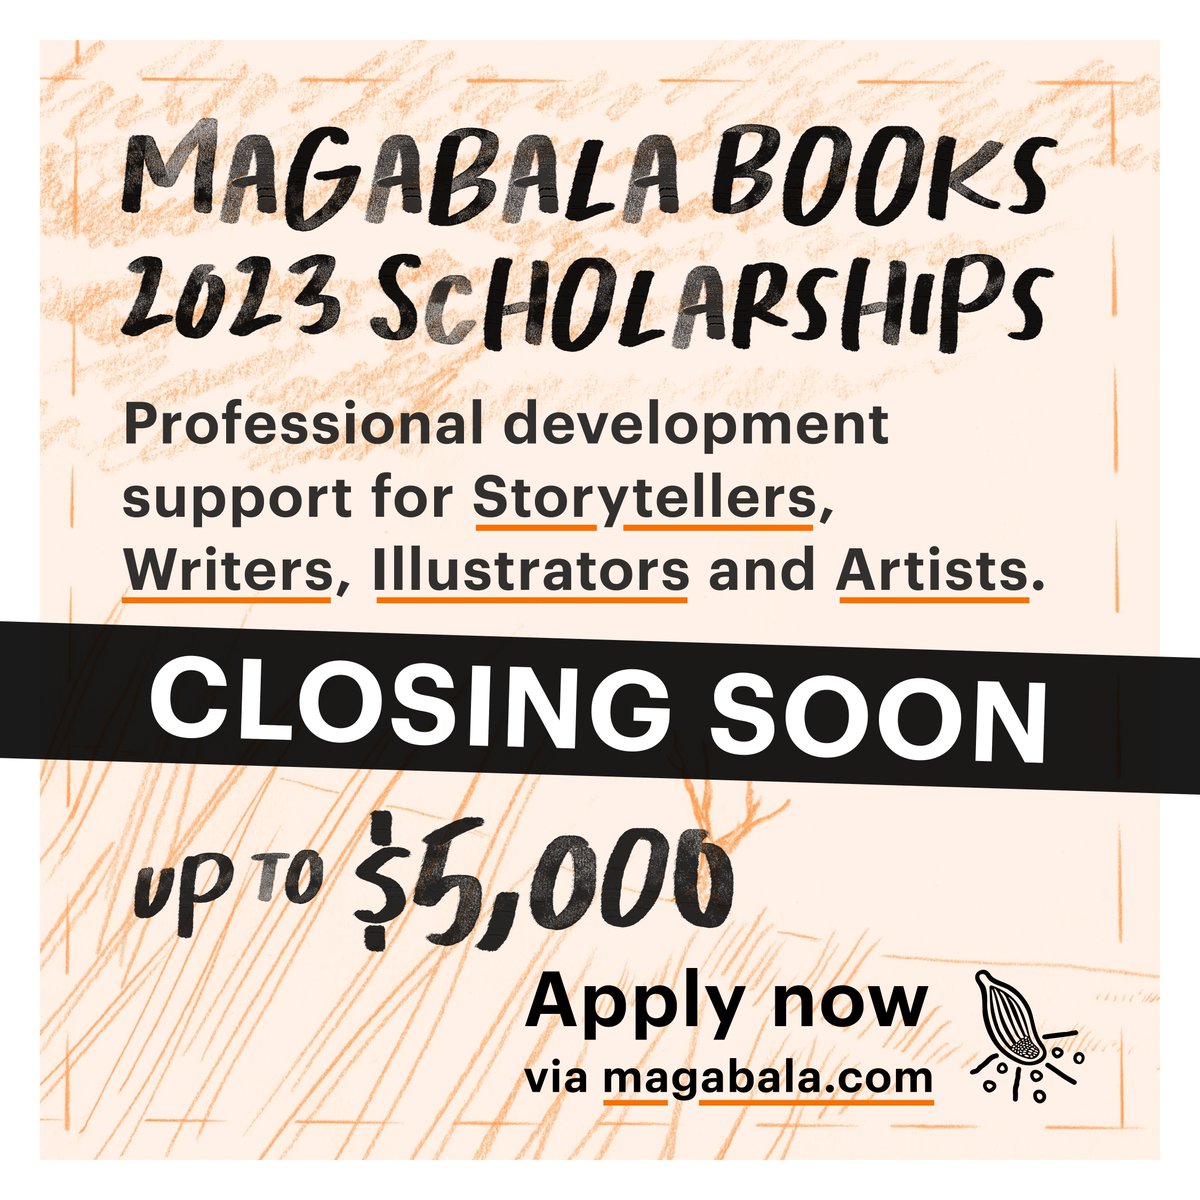 Magabala Books 2023 Scholarships are closing soon! Applications can be submitted via Magabala Books website. Closing date midnight, AWST, Monday 30th October 2023. #CreativeGrants #magabalabooks #scholarship #Indigenous #FirstNationPublishing #FirstNationsAuthors